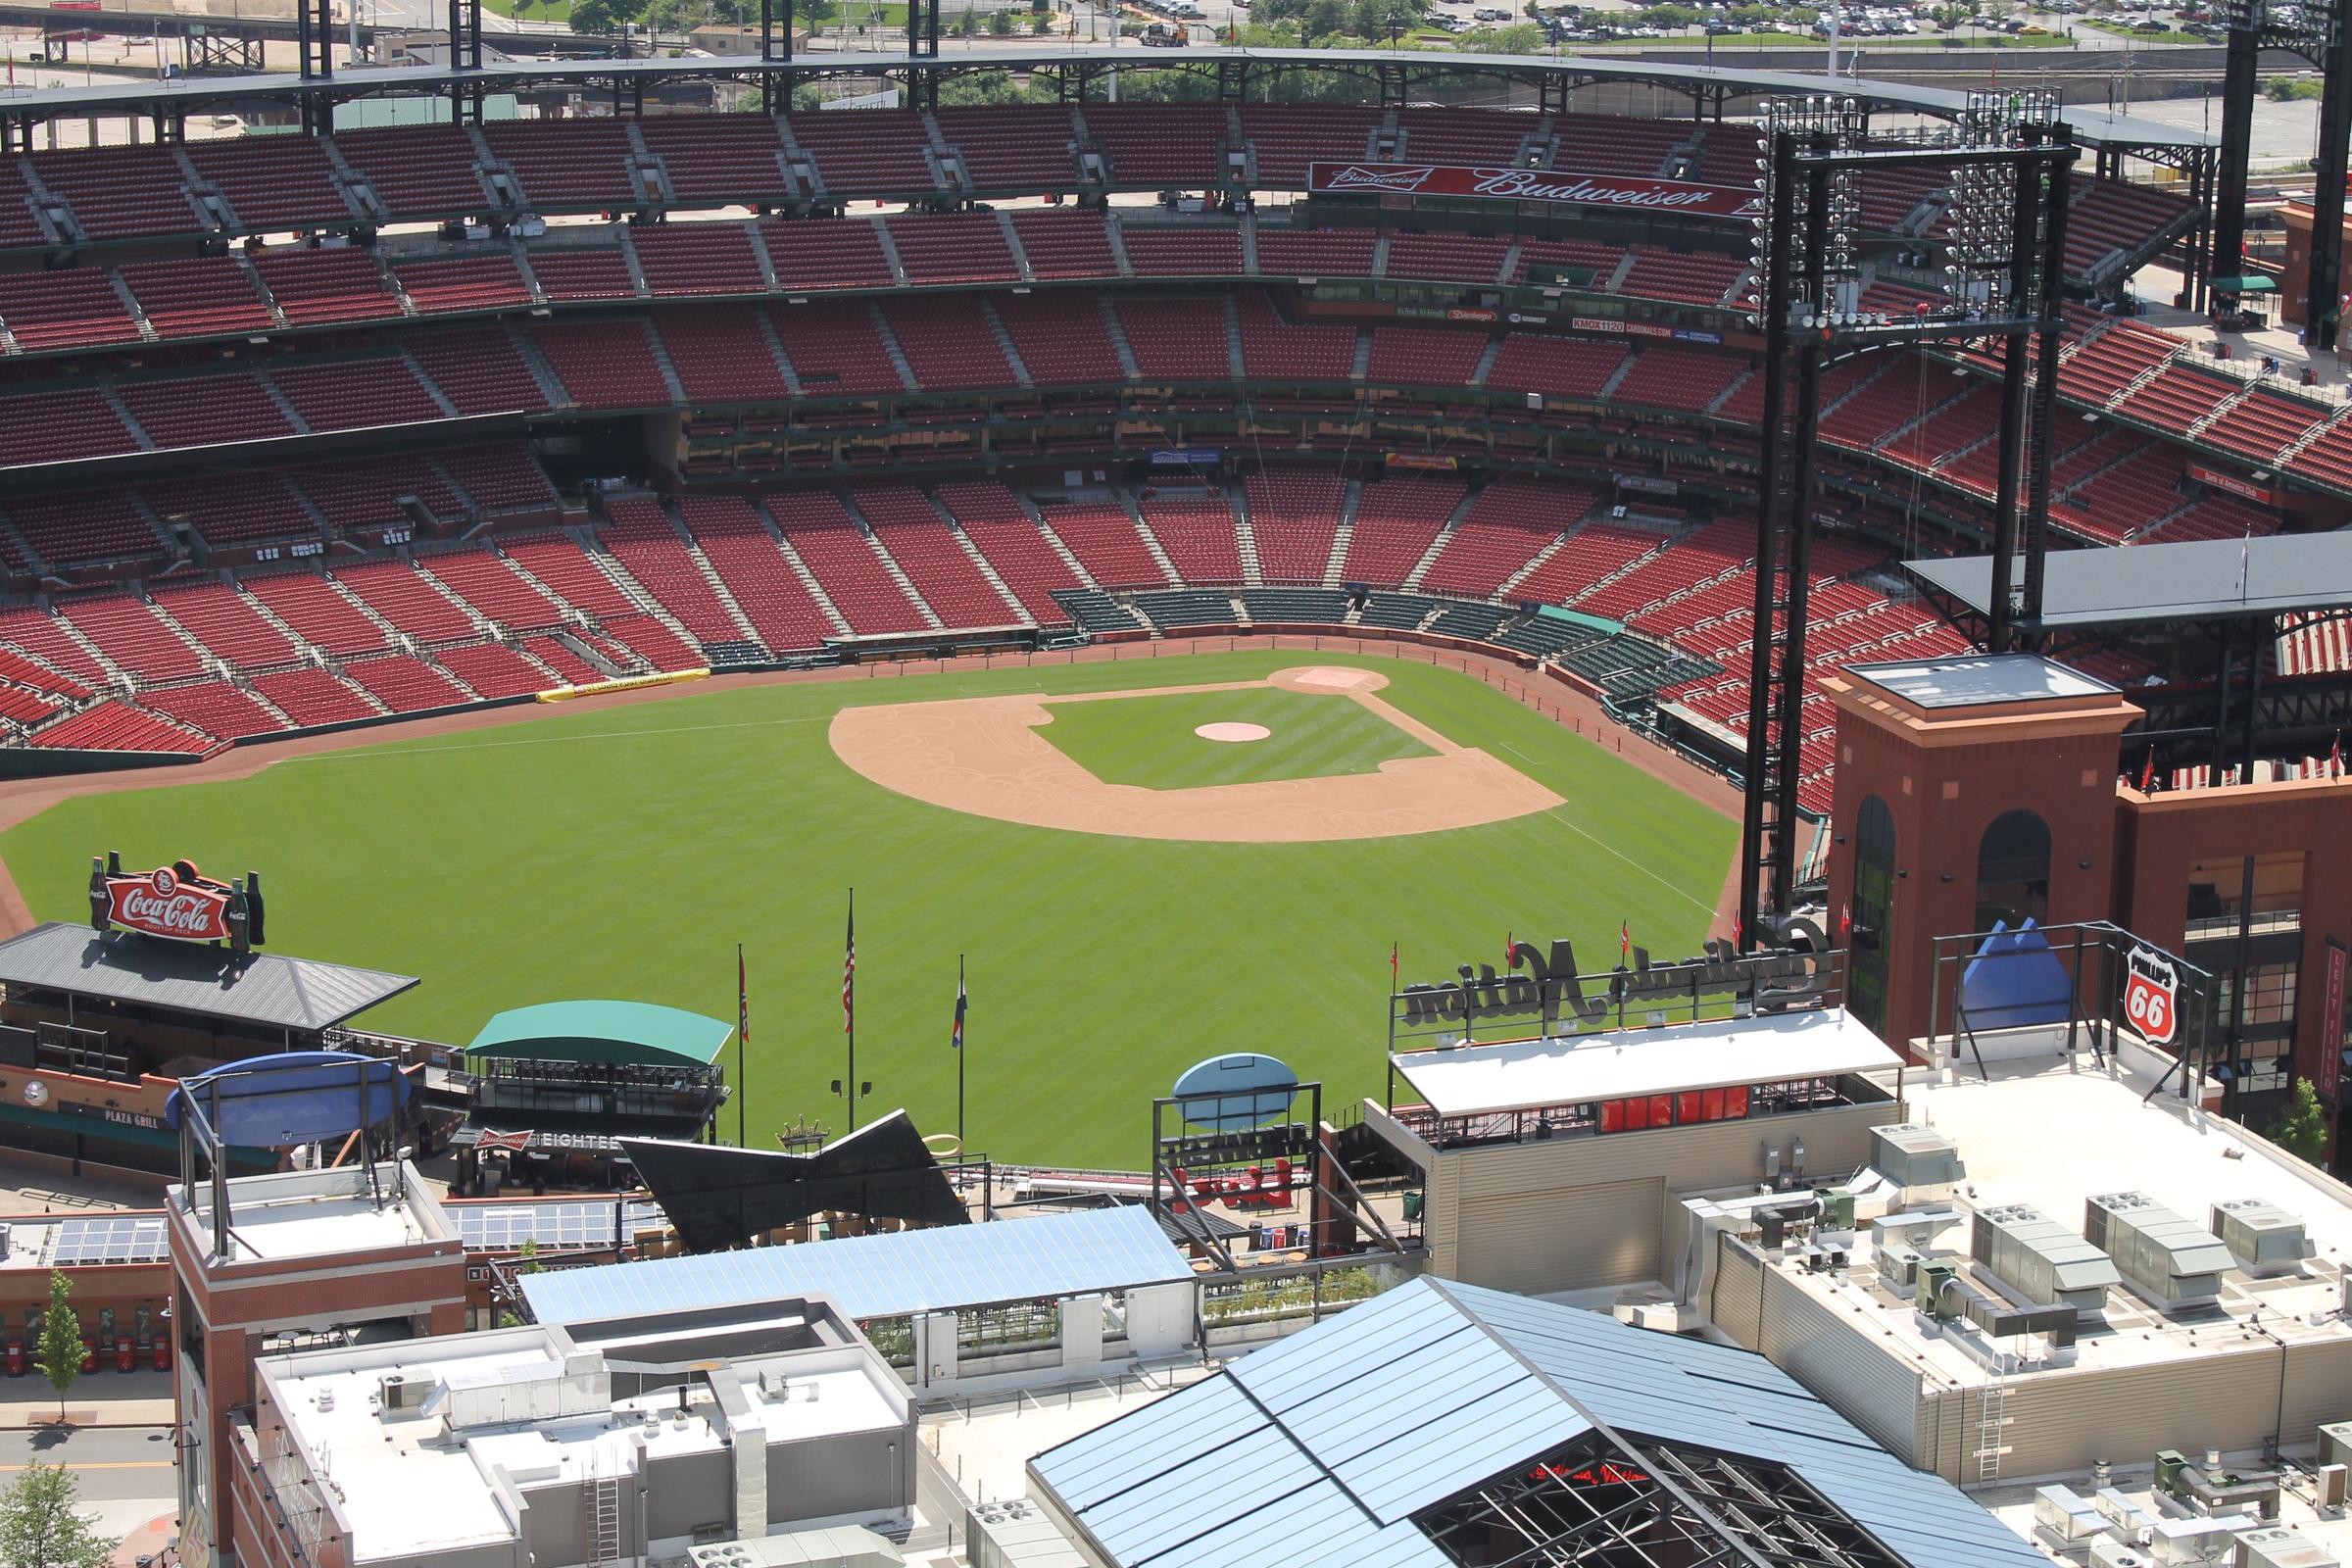 Stray bullet hits fan at Busch Stadium; investigation ongoing | St. Louis Public Radio